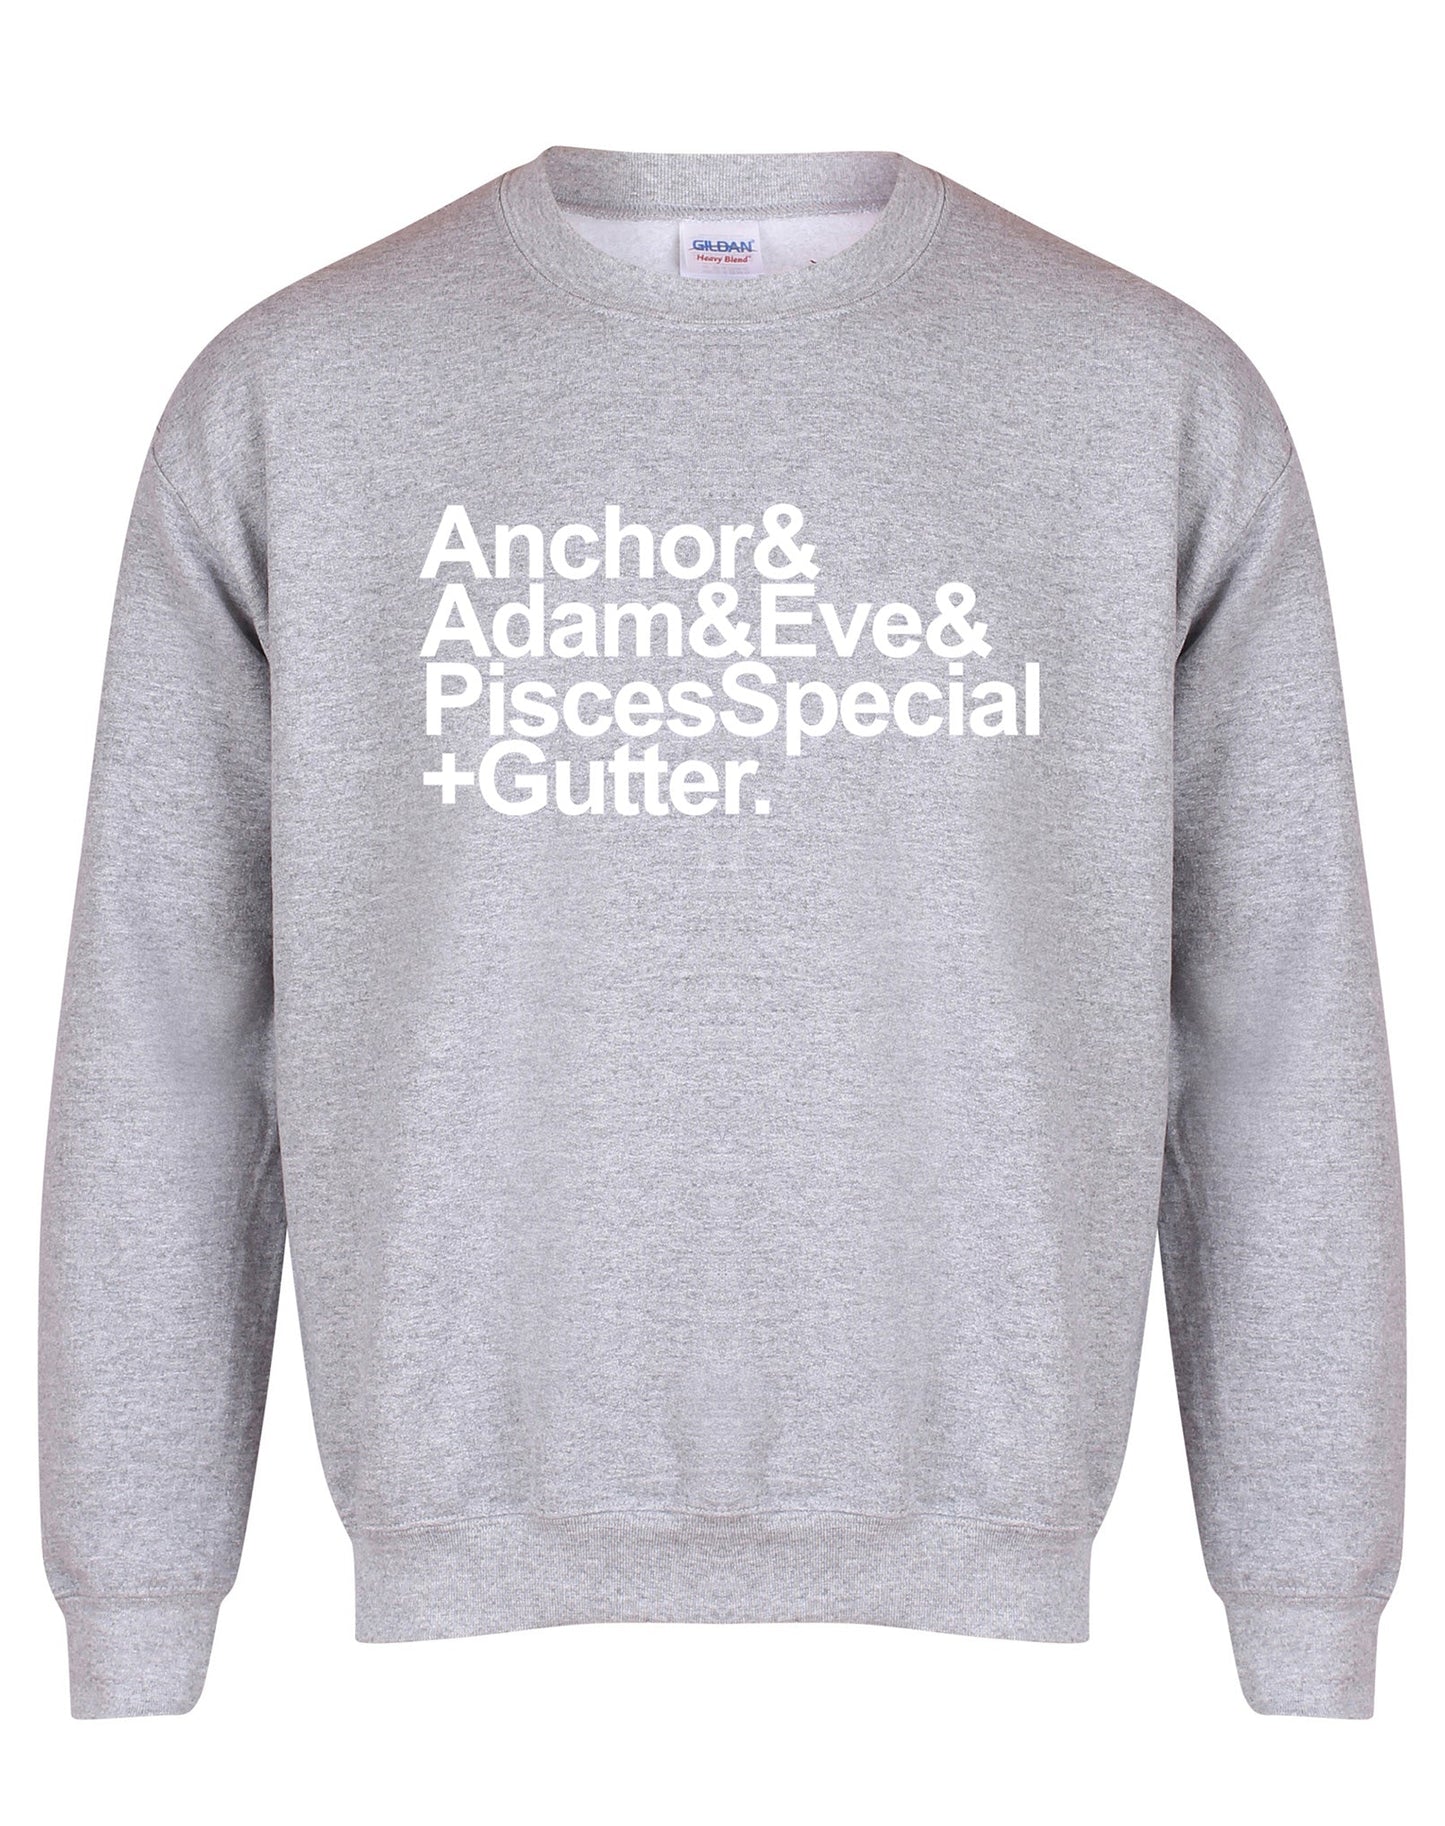 Anchor to Adam & Eve unisex sweatshirt - various colours - Dirty Stop Outs